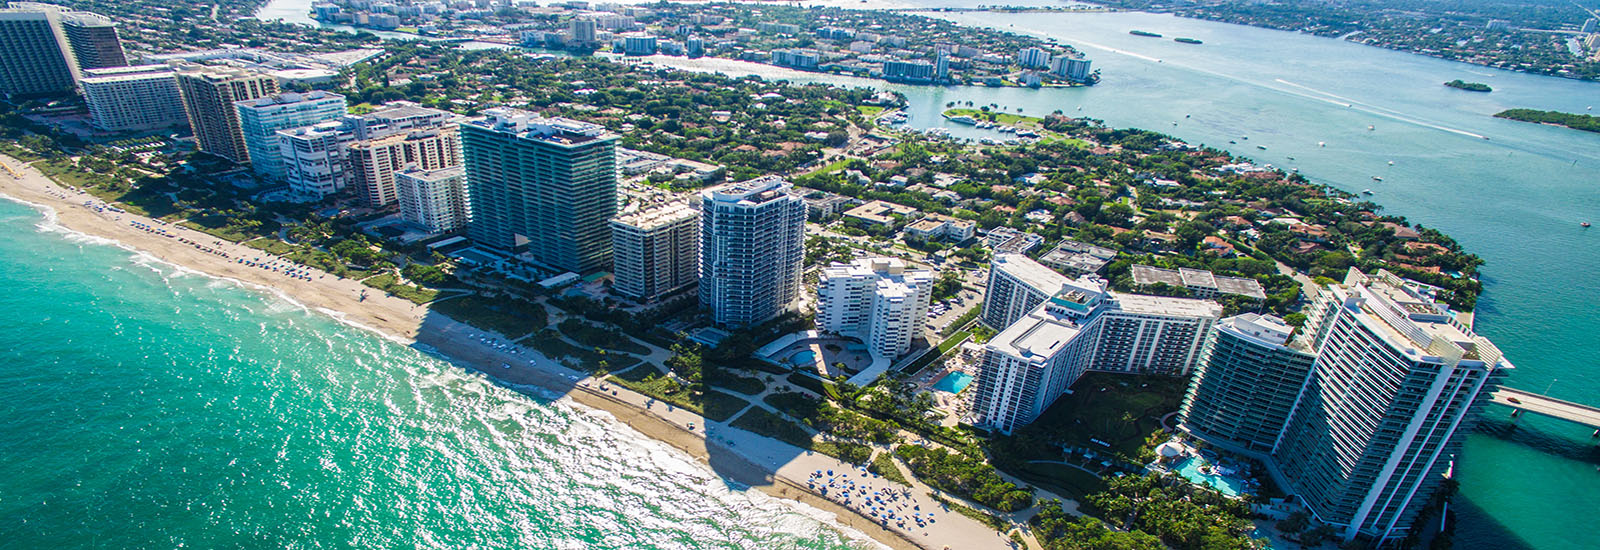 This is a stock photo. An aerial image of the Miami Beach coastline.